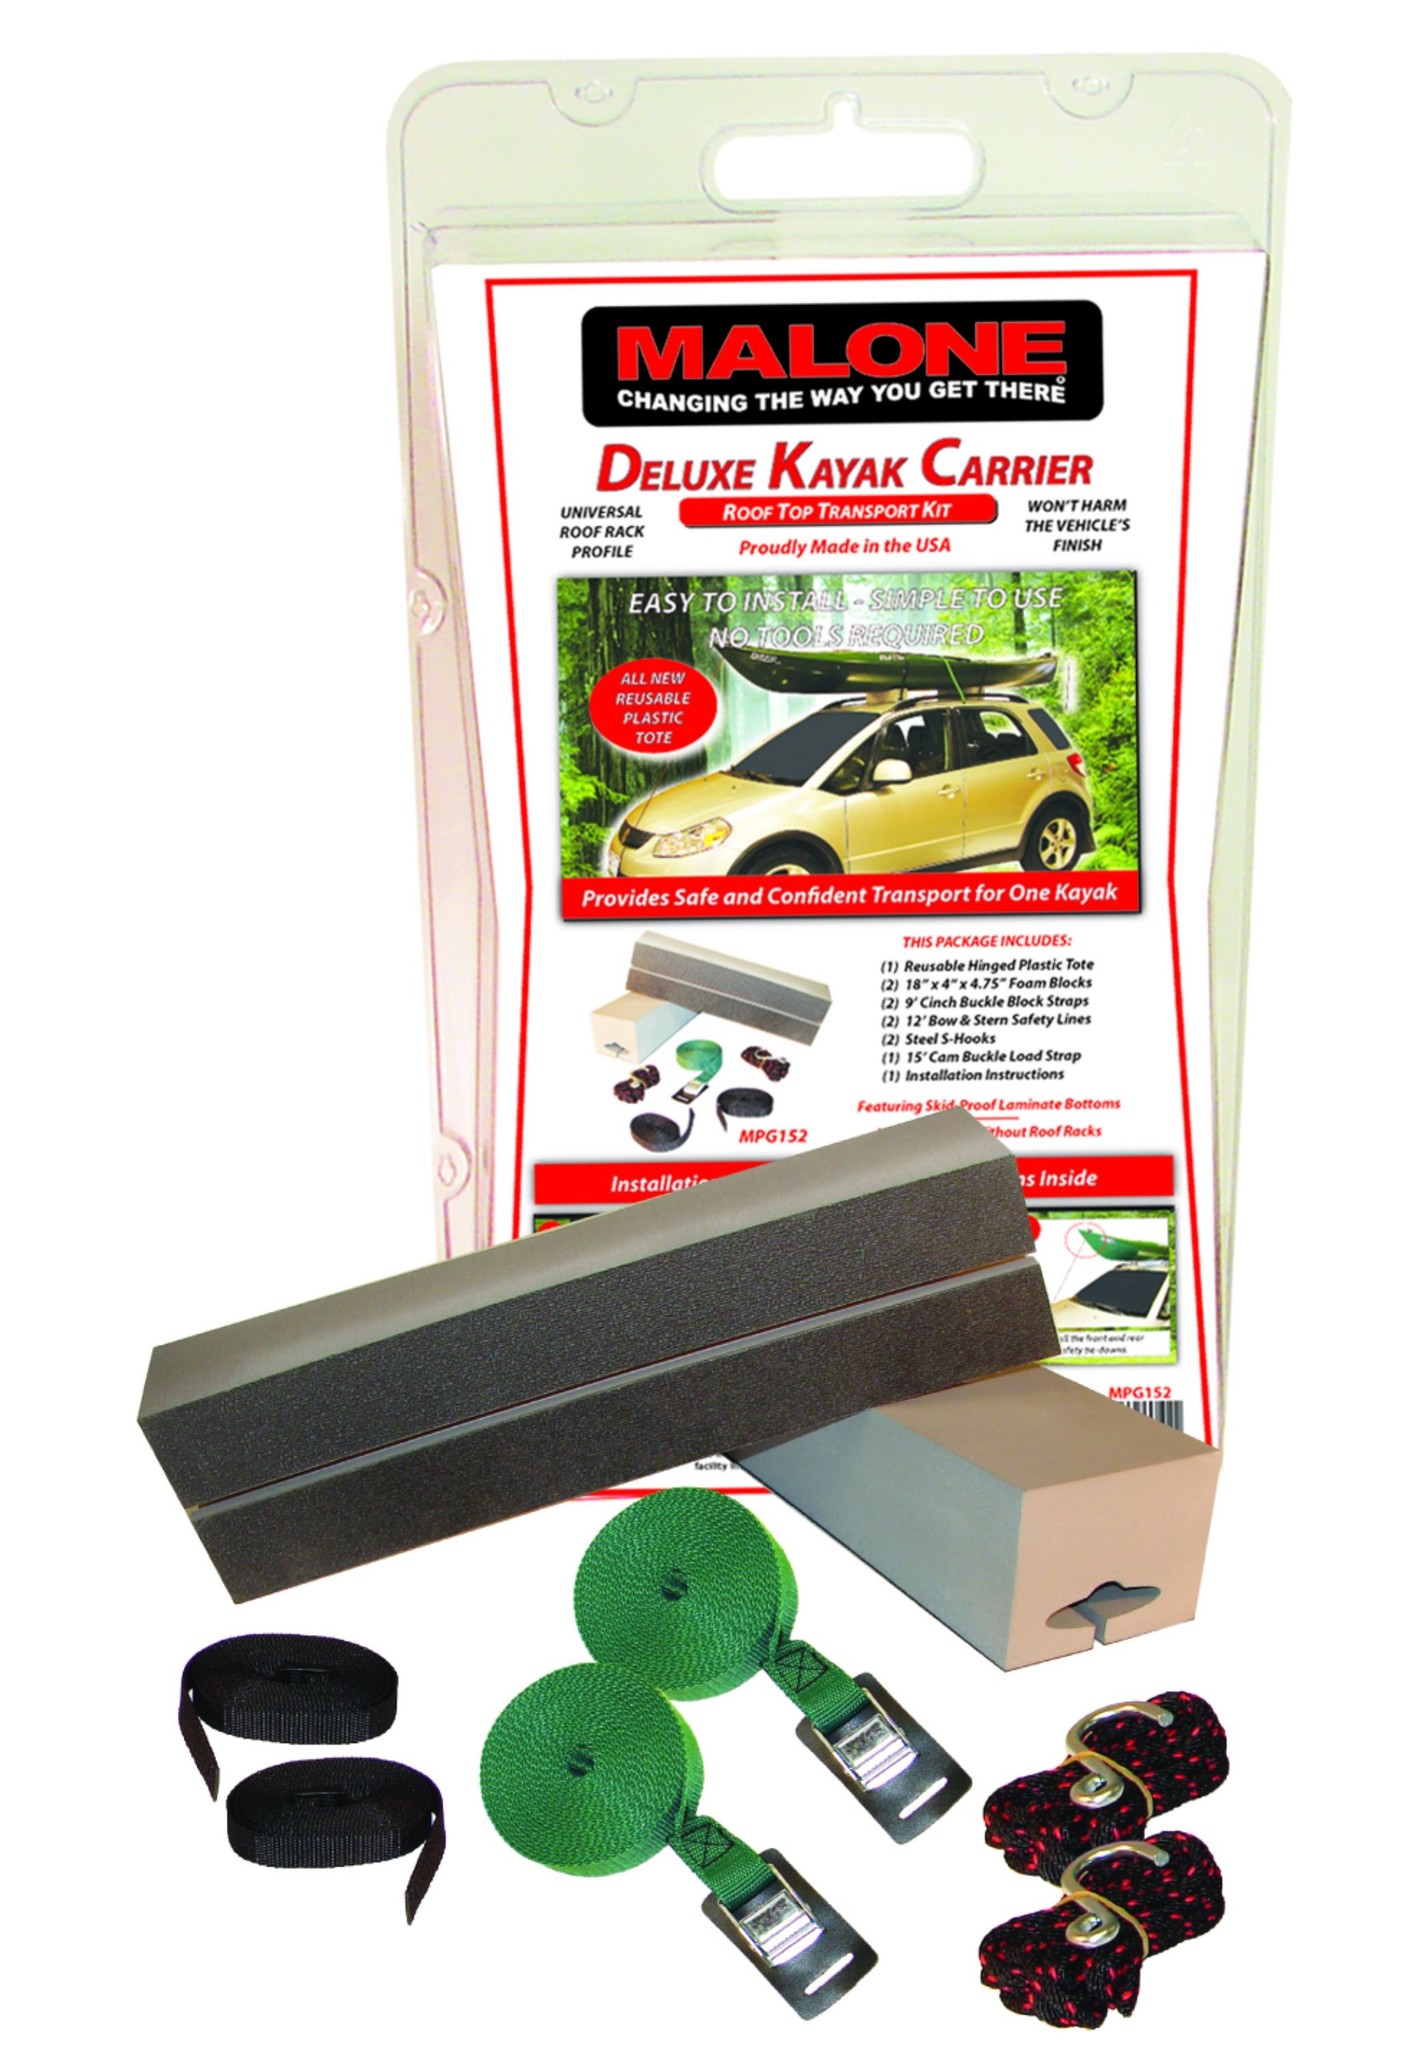 Malone Deluxe Kayak Carrier Kit, Malone